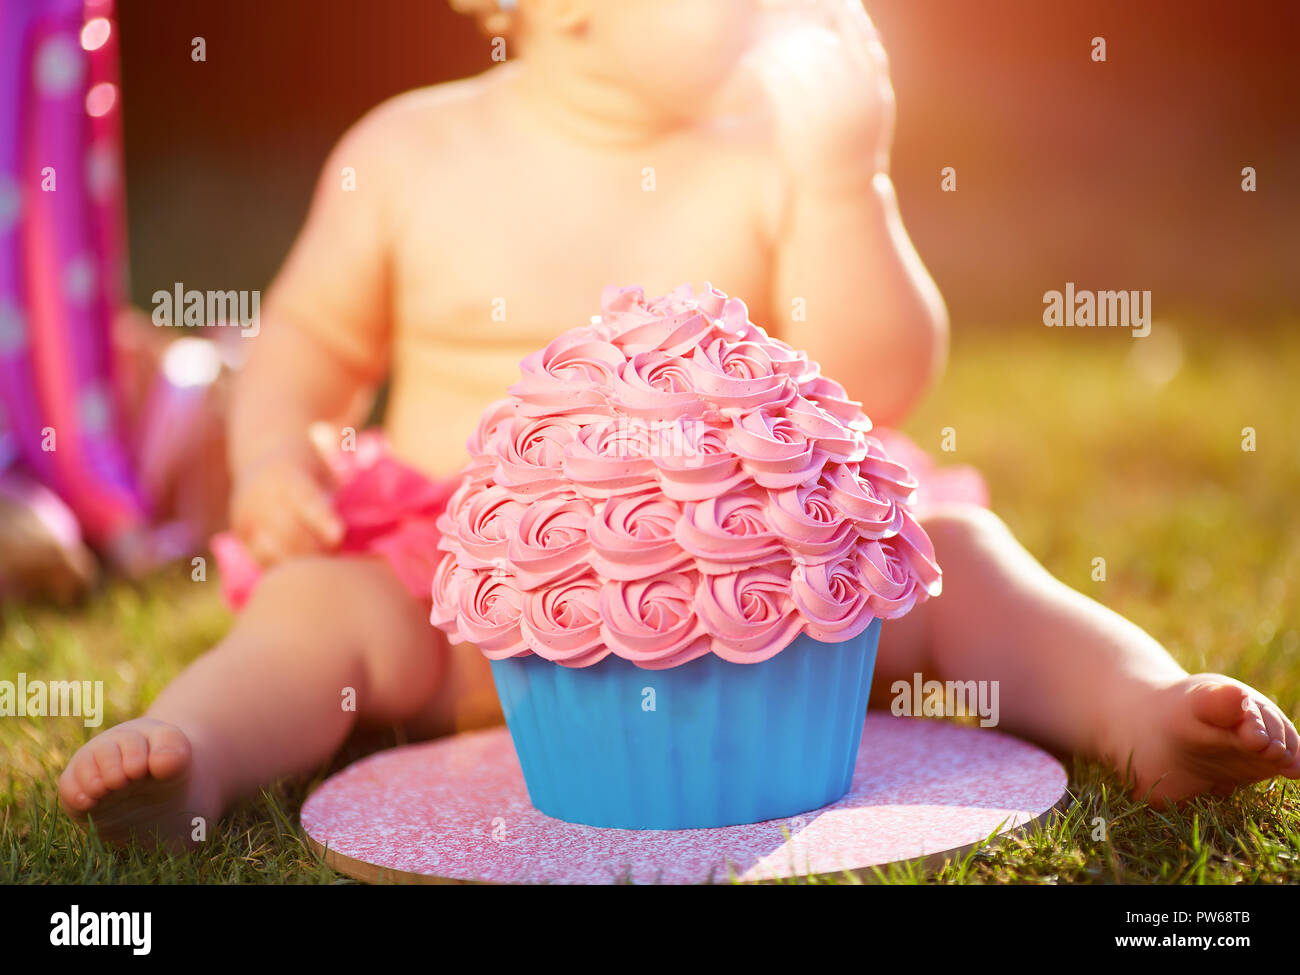 One year old girl eating her first cake Stock Photo